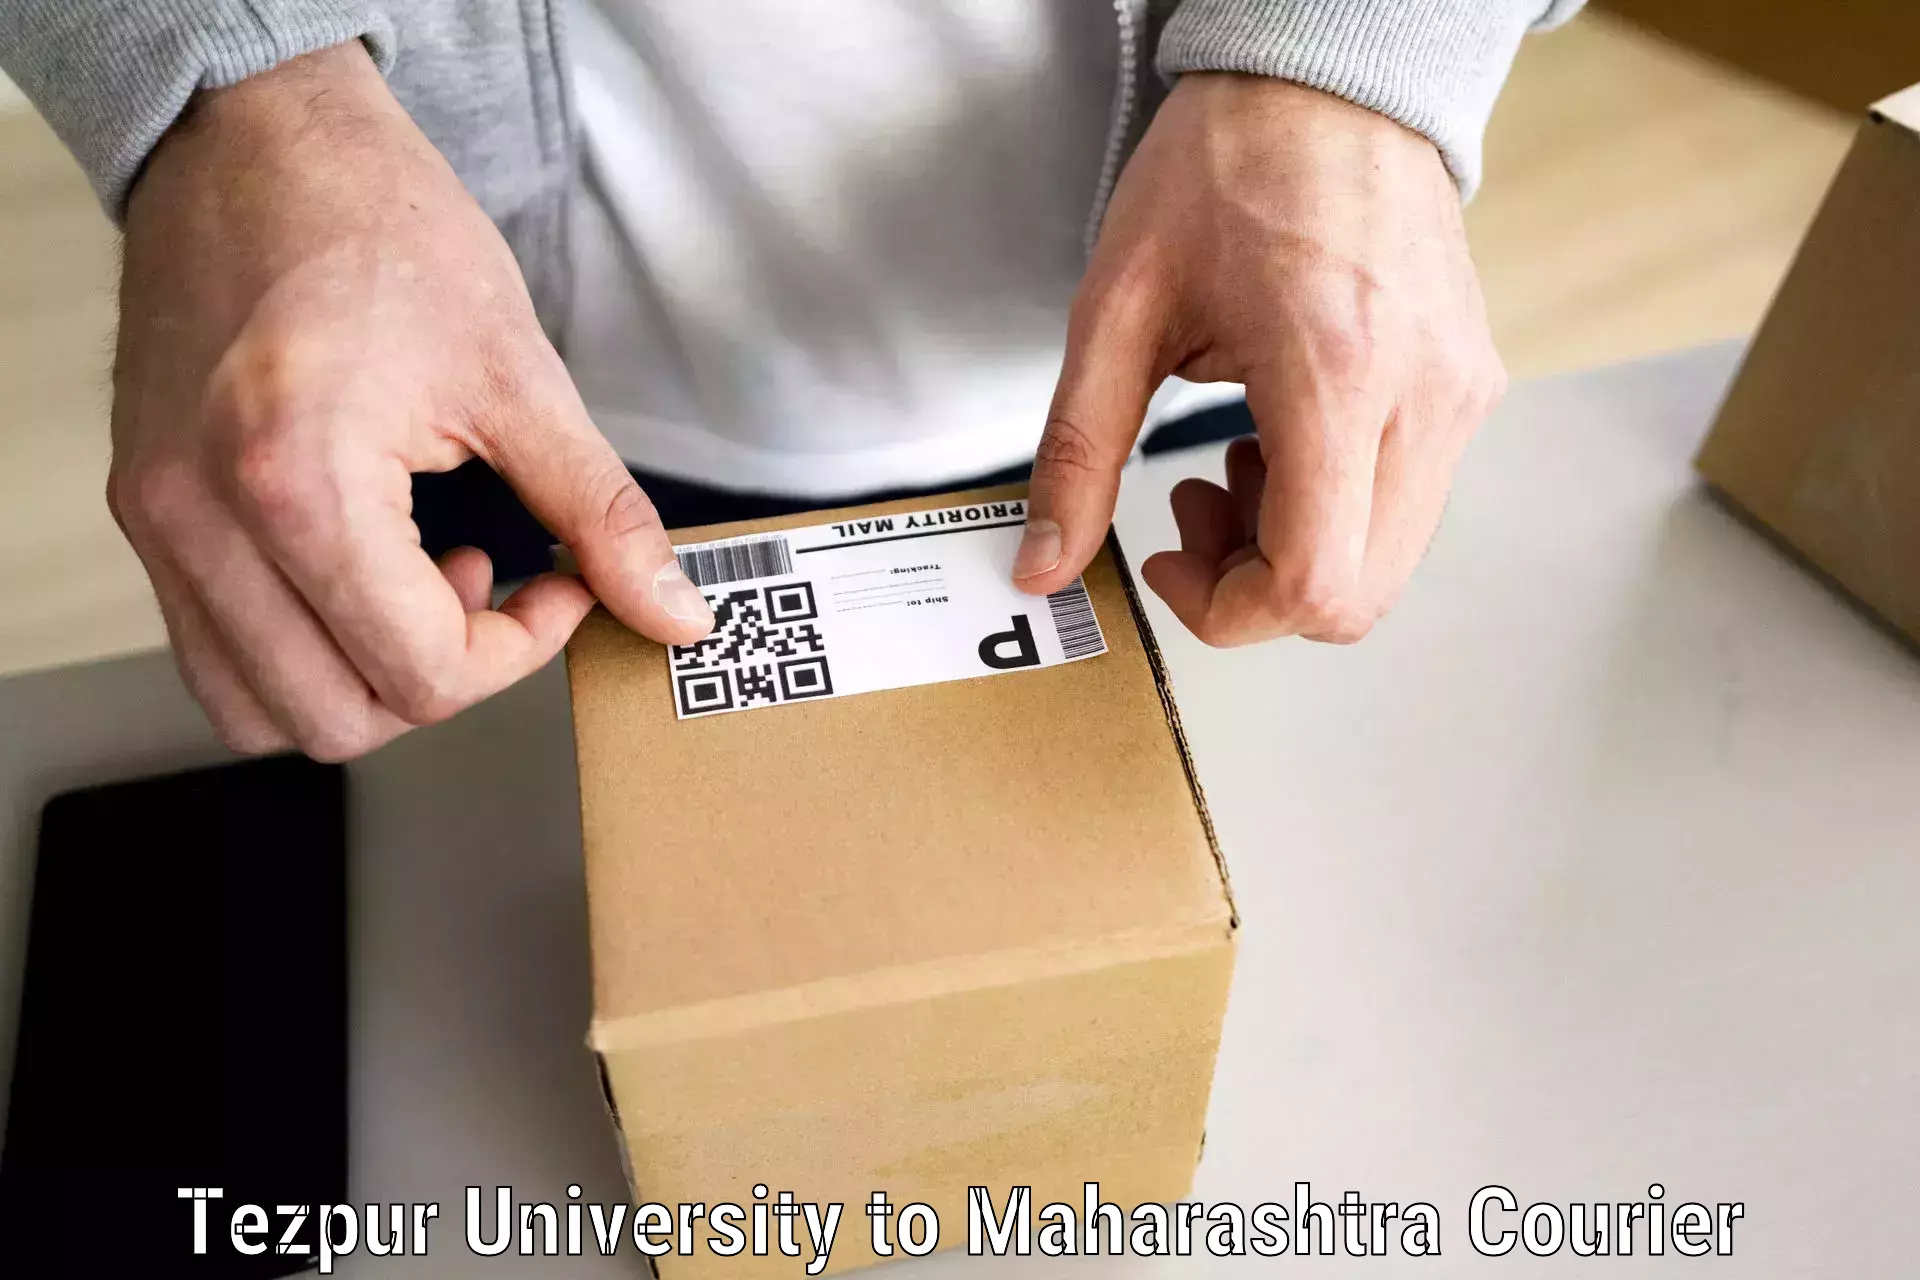 Quality moving and storage in Tezpur University to Mahagaon